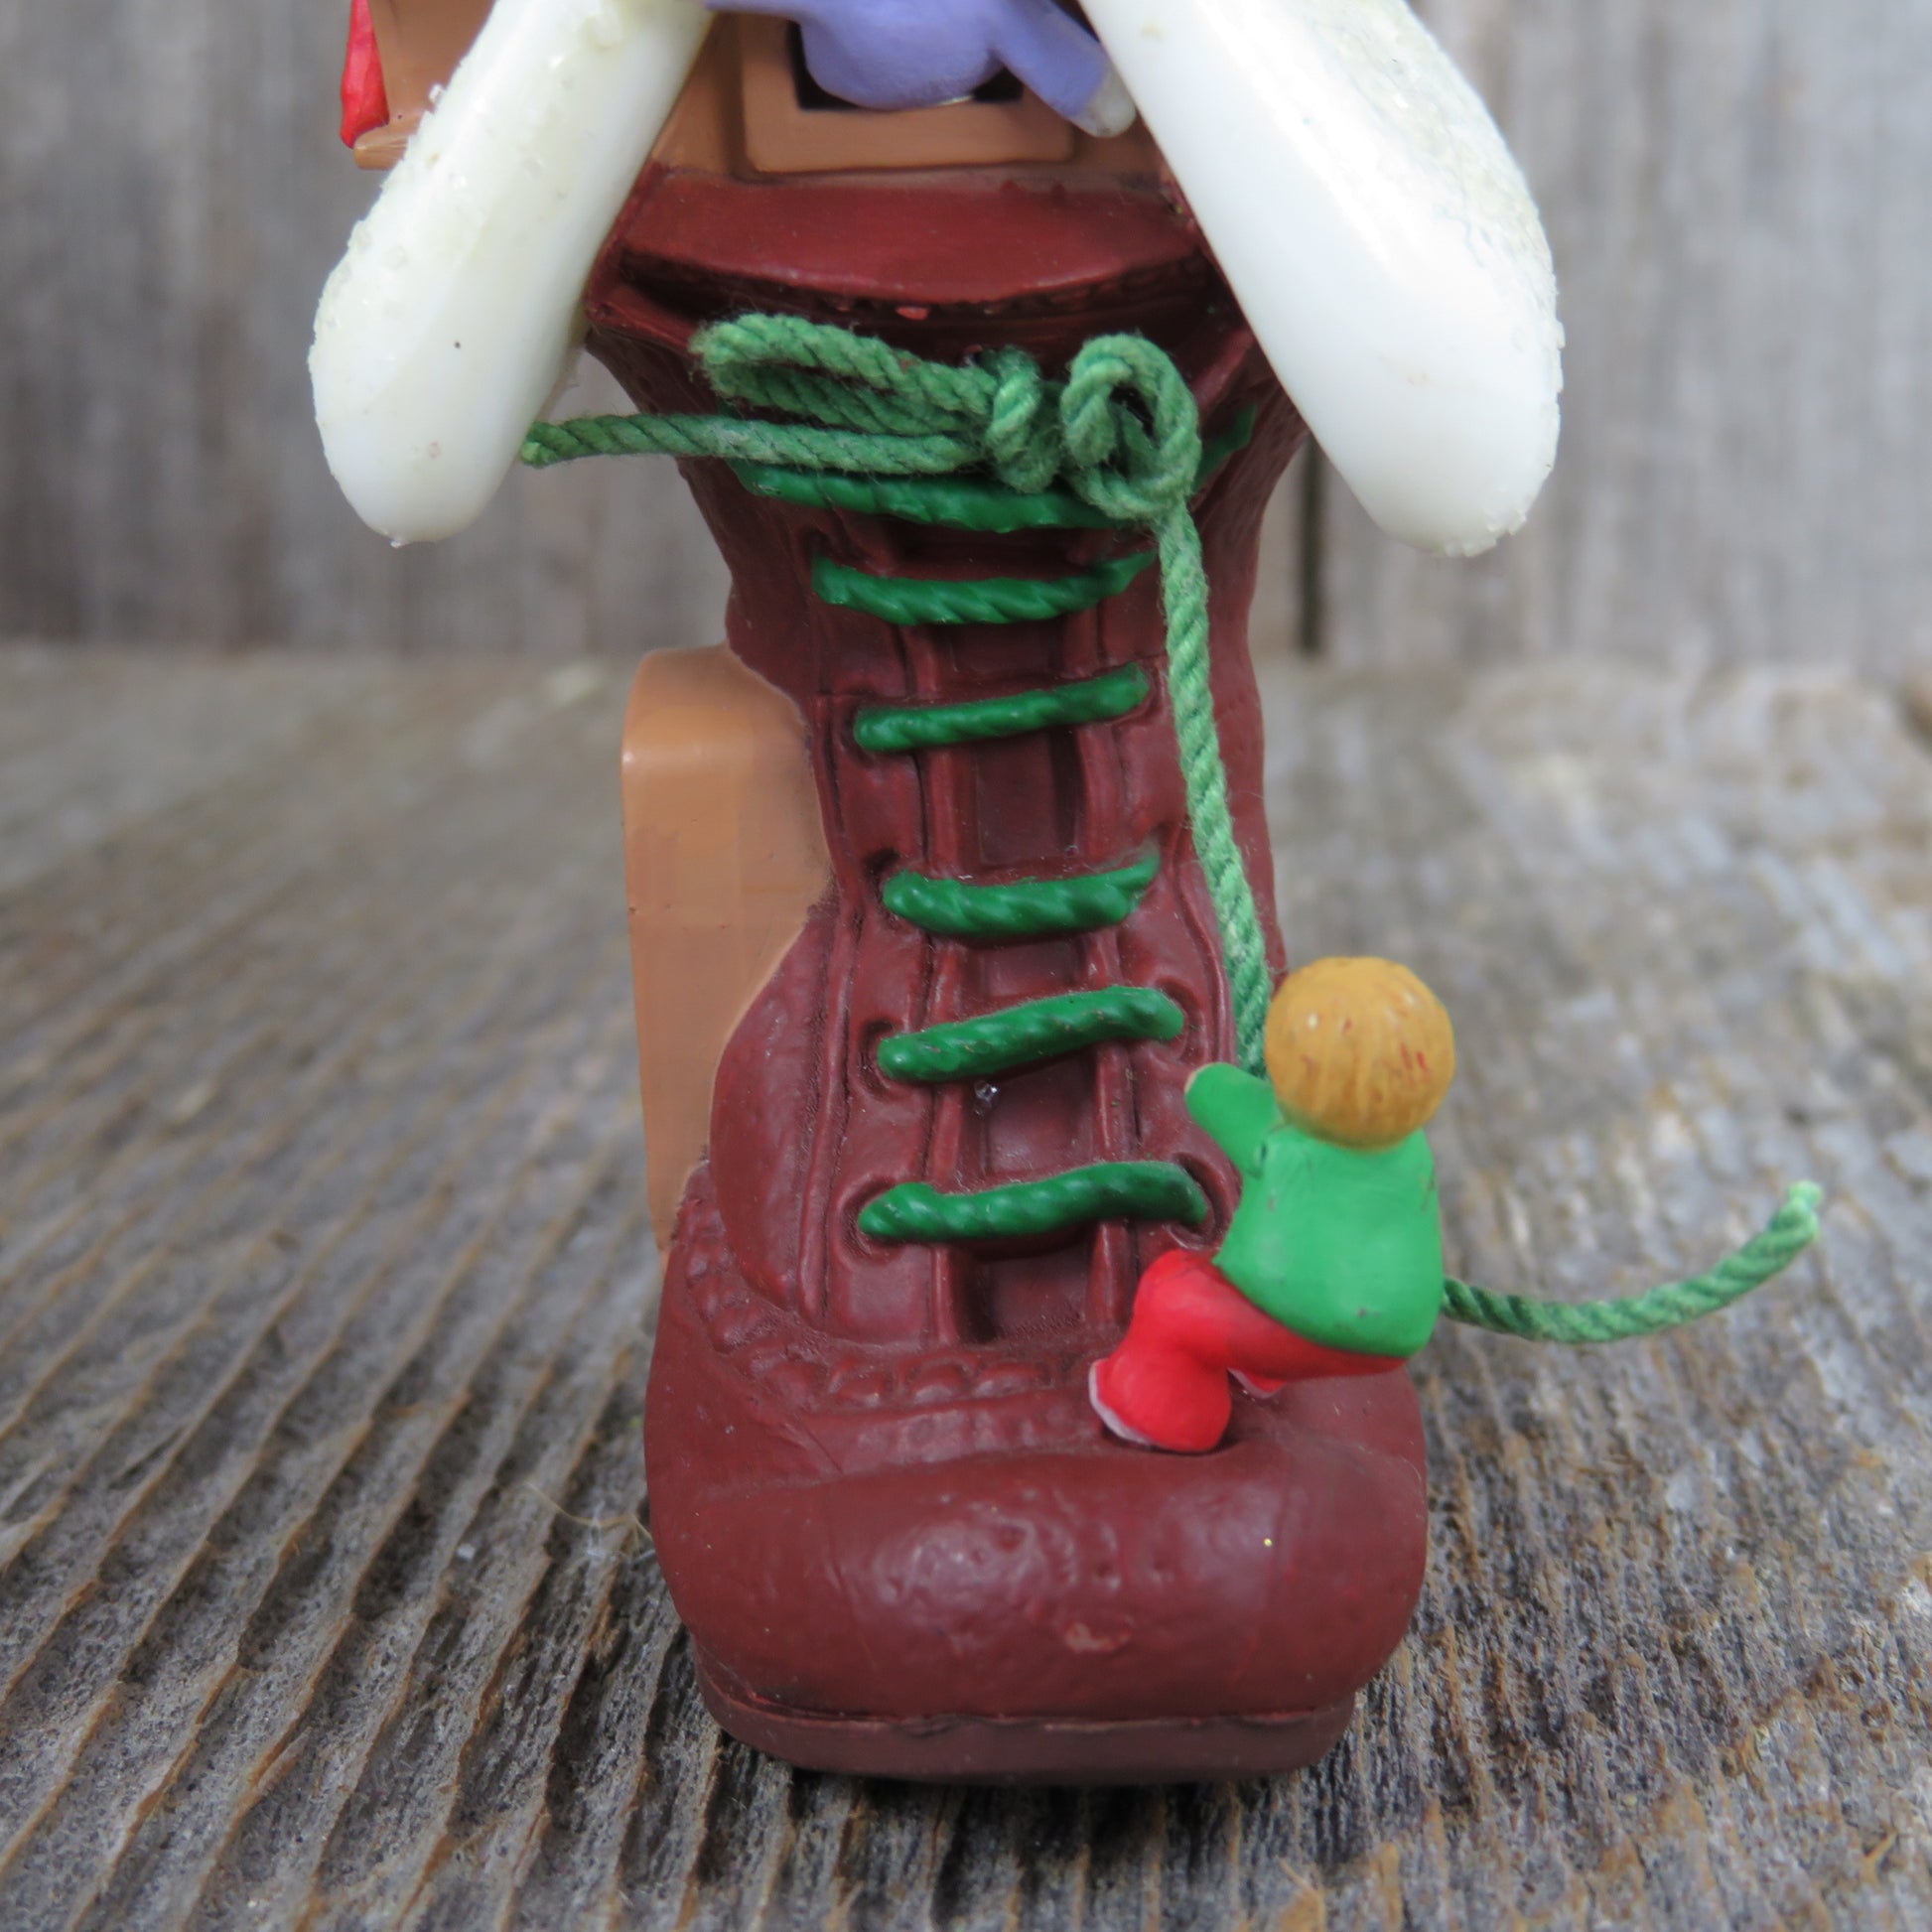 Vintage Boot Shoe Ornament Old Woman Who Lived in a Shoe Hallmark Christmas 1985 Nursery Rhyme Ornament - At Grandma's Table